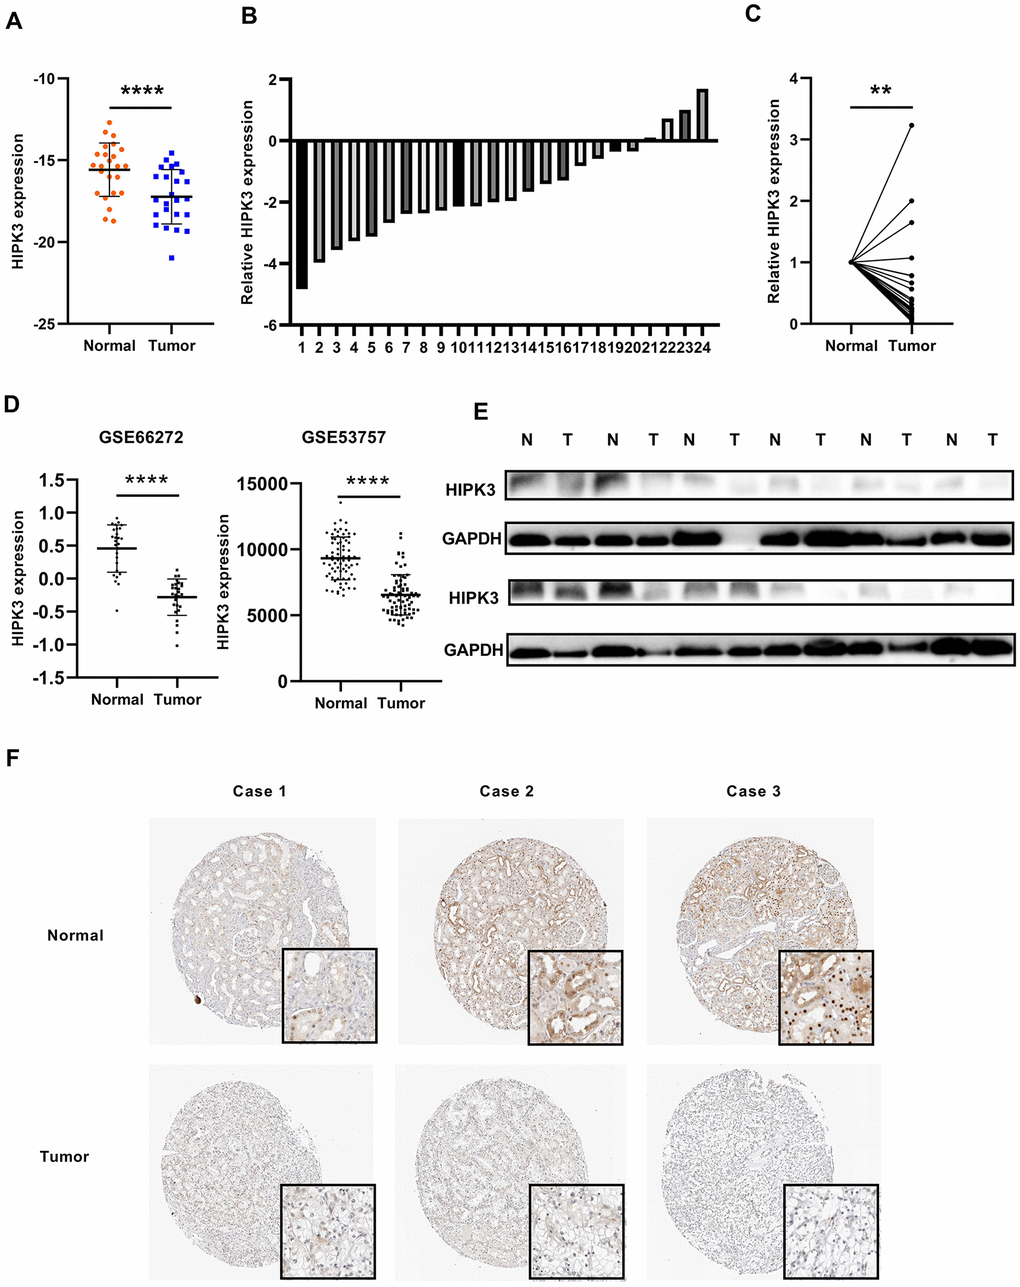 HIPK3 is downregulated in ccRCC tissues. (A, B) Gene expression levels of HIPK3 in renal cancer tissues. (C) Relative HIPK3 expression was downregulated in renal cancer tissues. (D) Validation of HIPK3 expression in renal cancer with Gene Expression Omnibus (GEO66727, GEO53757). (E) IHC analyses of HIPK3 expression in ccRCC tissues and paracancer tissues. **P